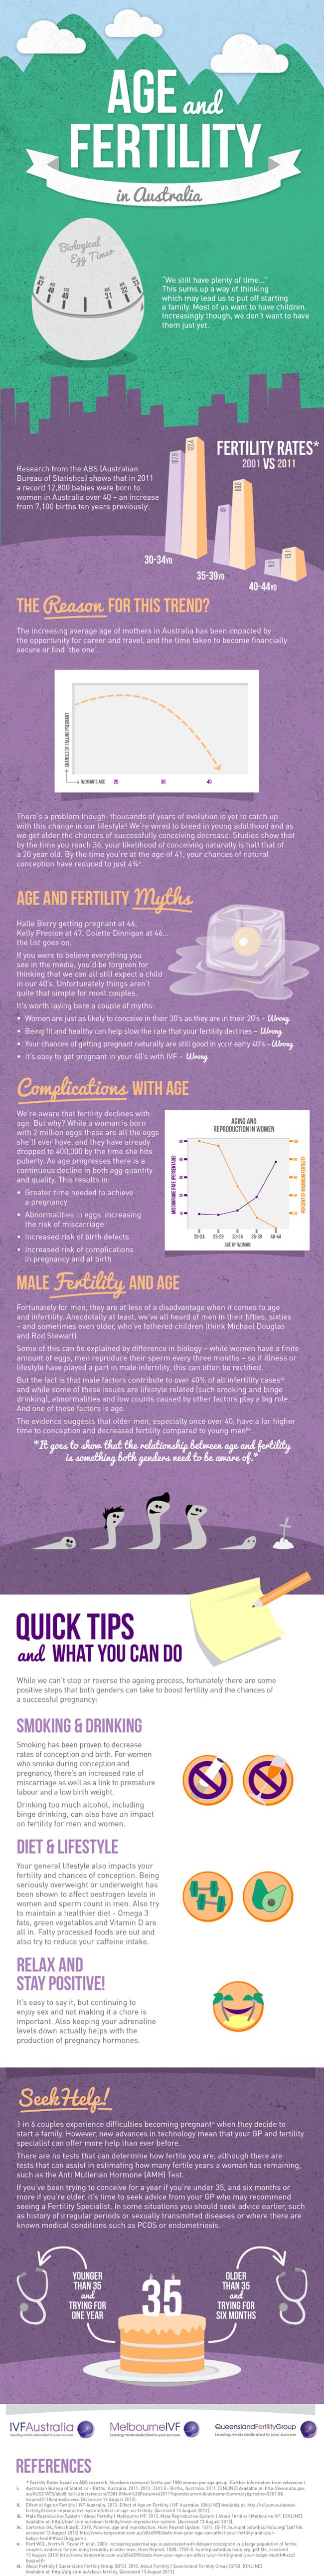 Fertility And Age in Australian Women - The Statistics and The Stories